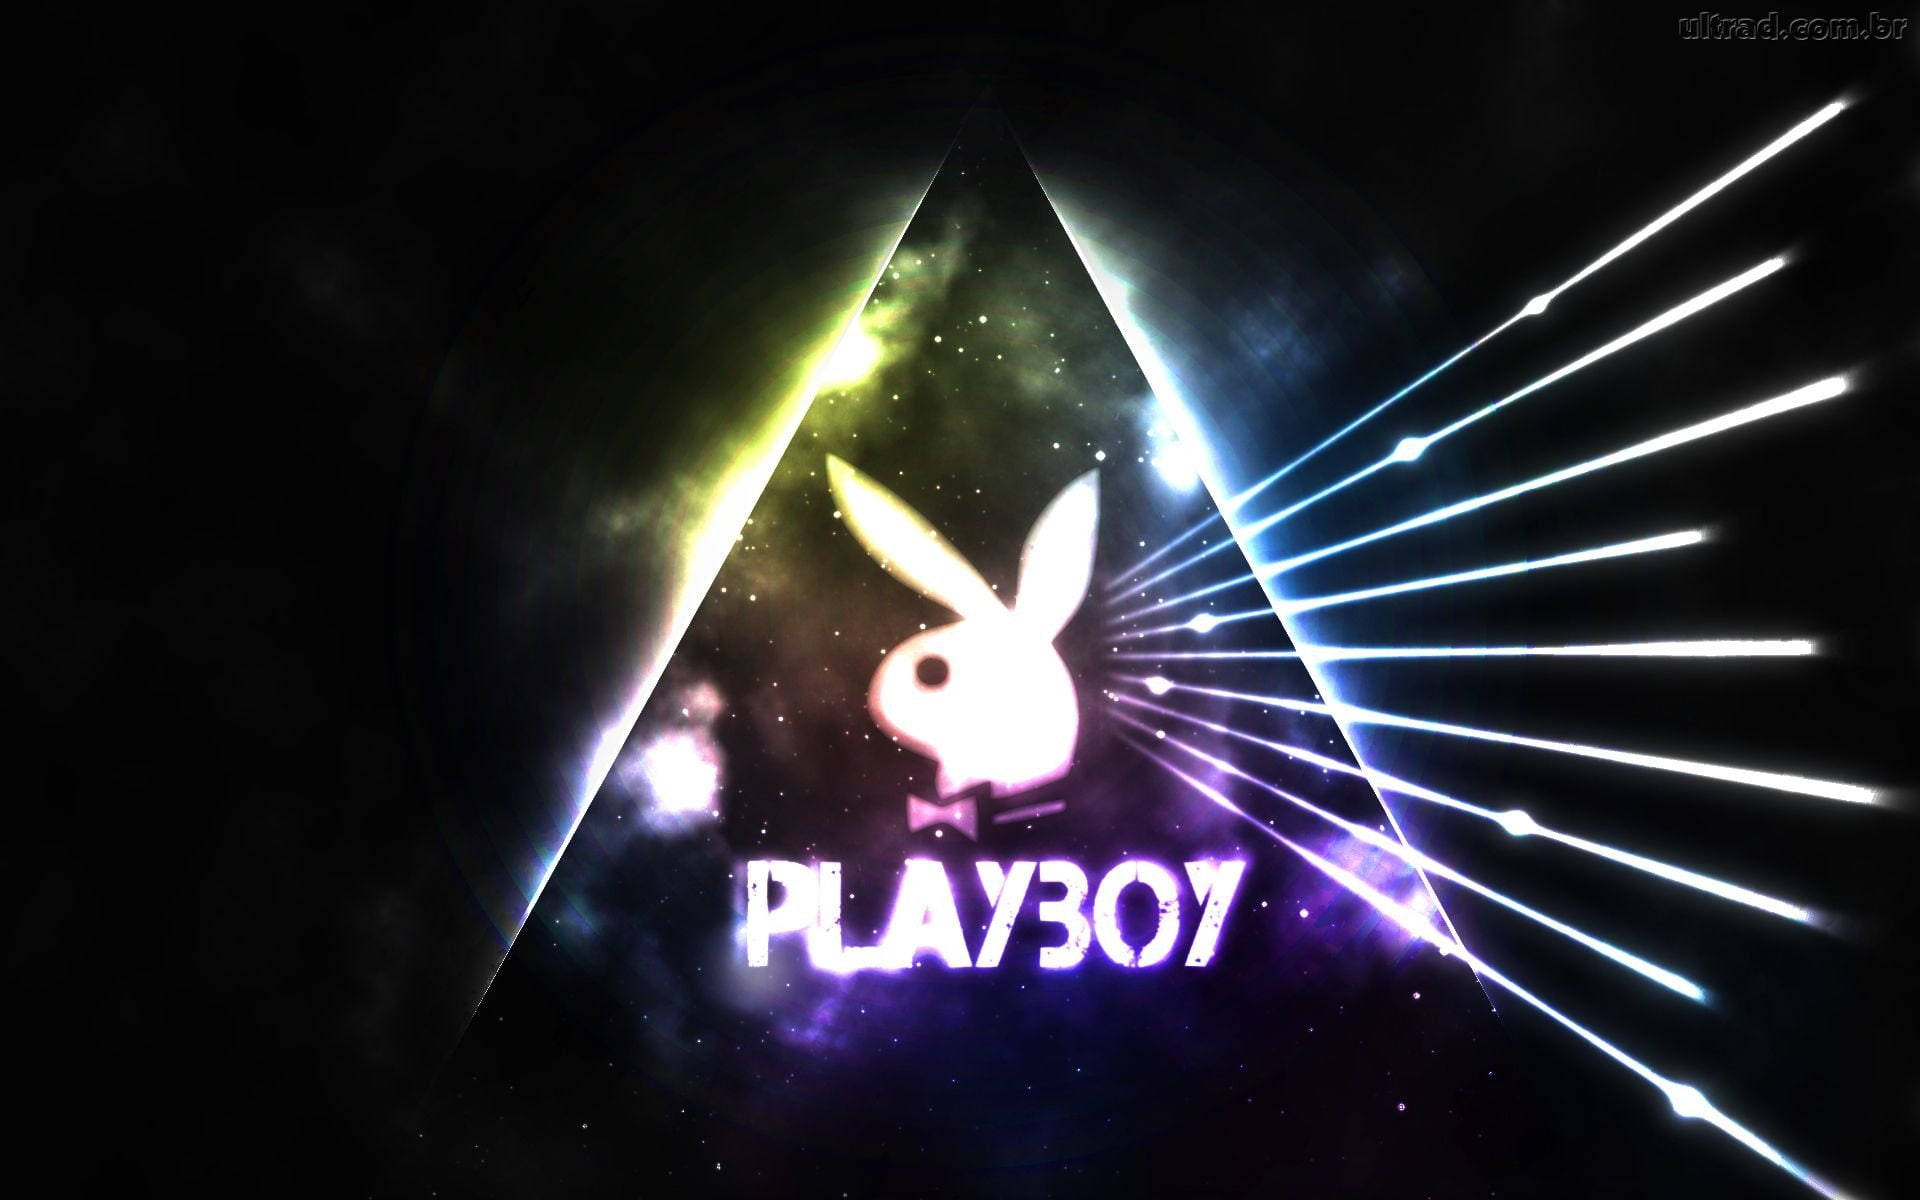 Playboy Logo With Glowing Rays Background